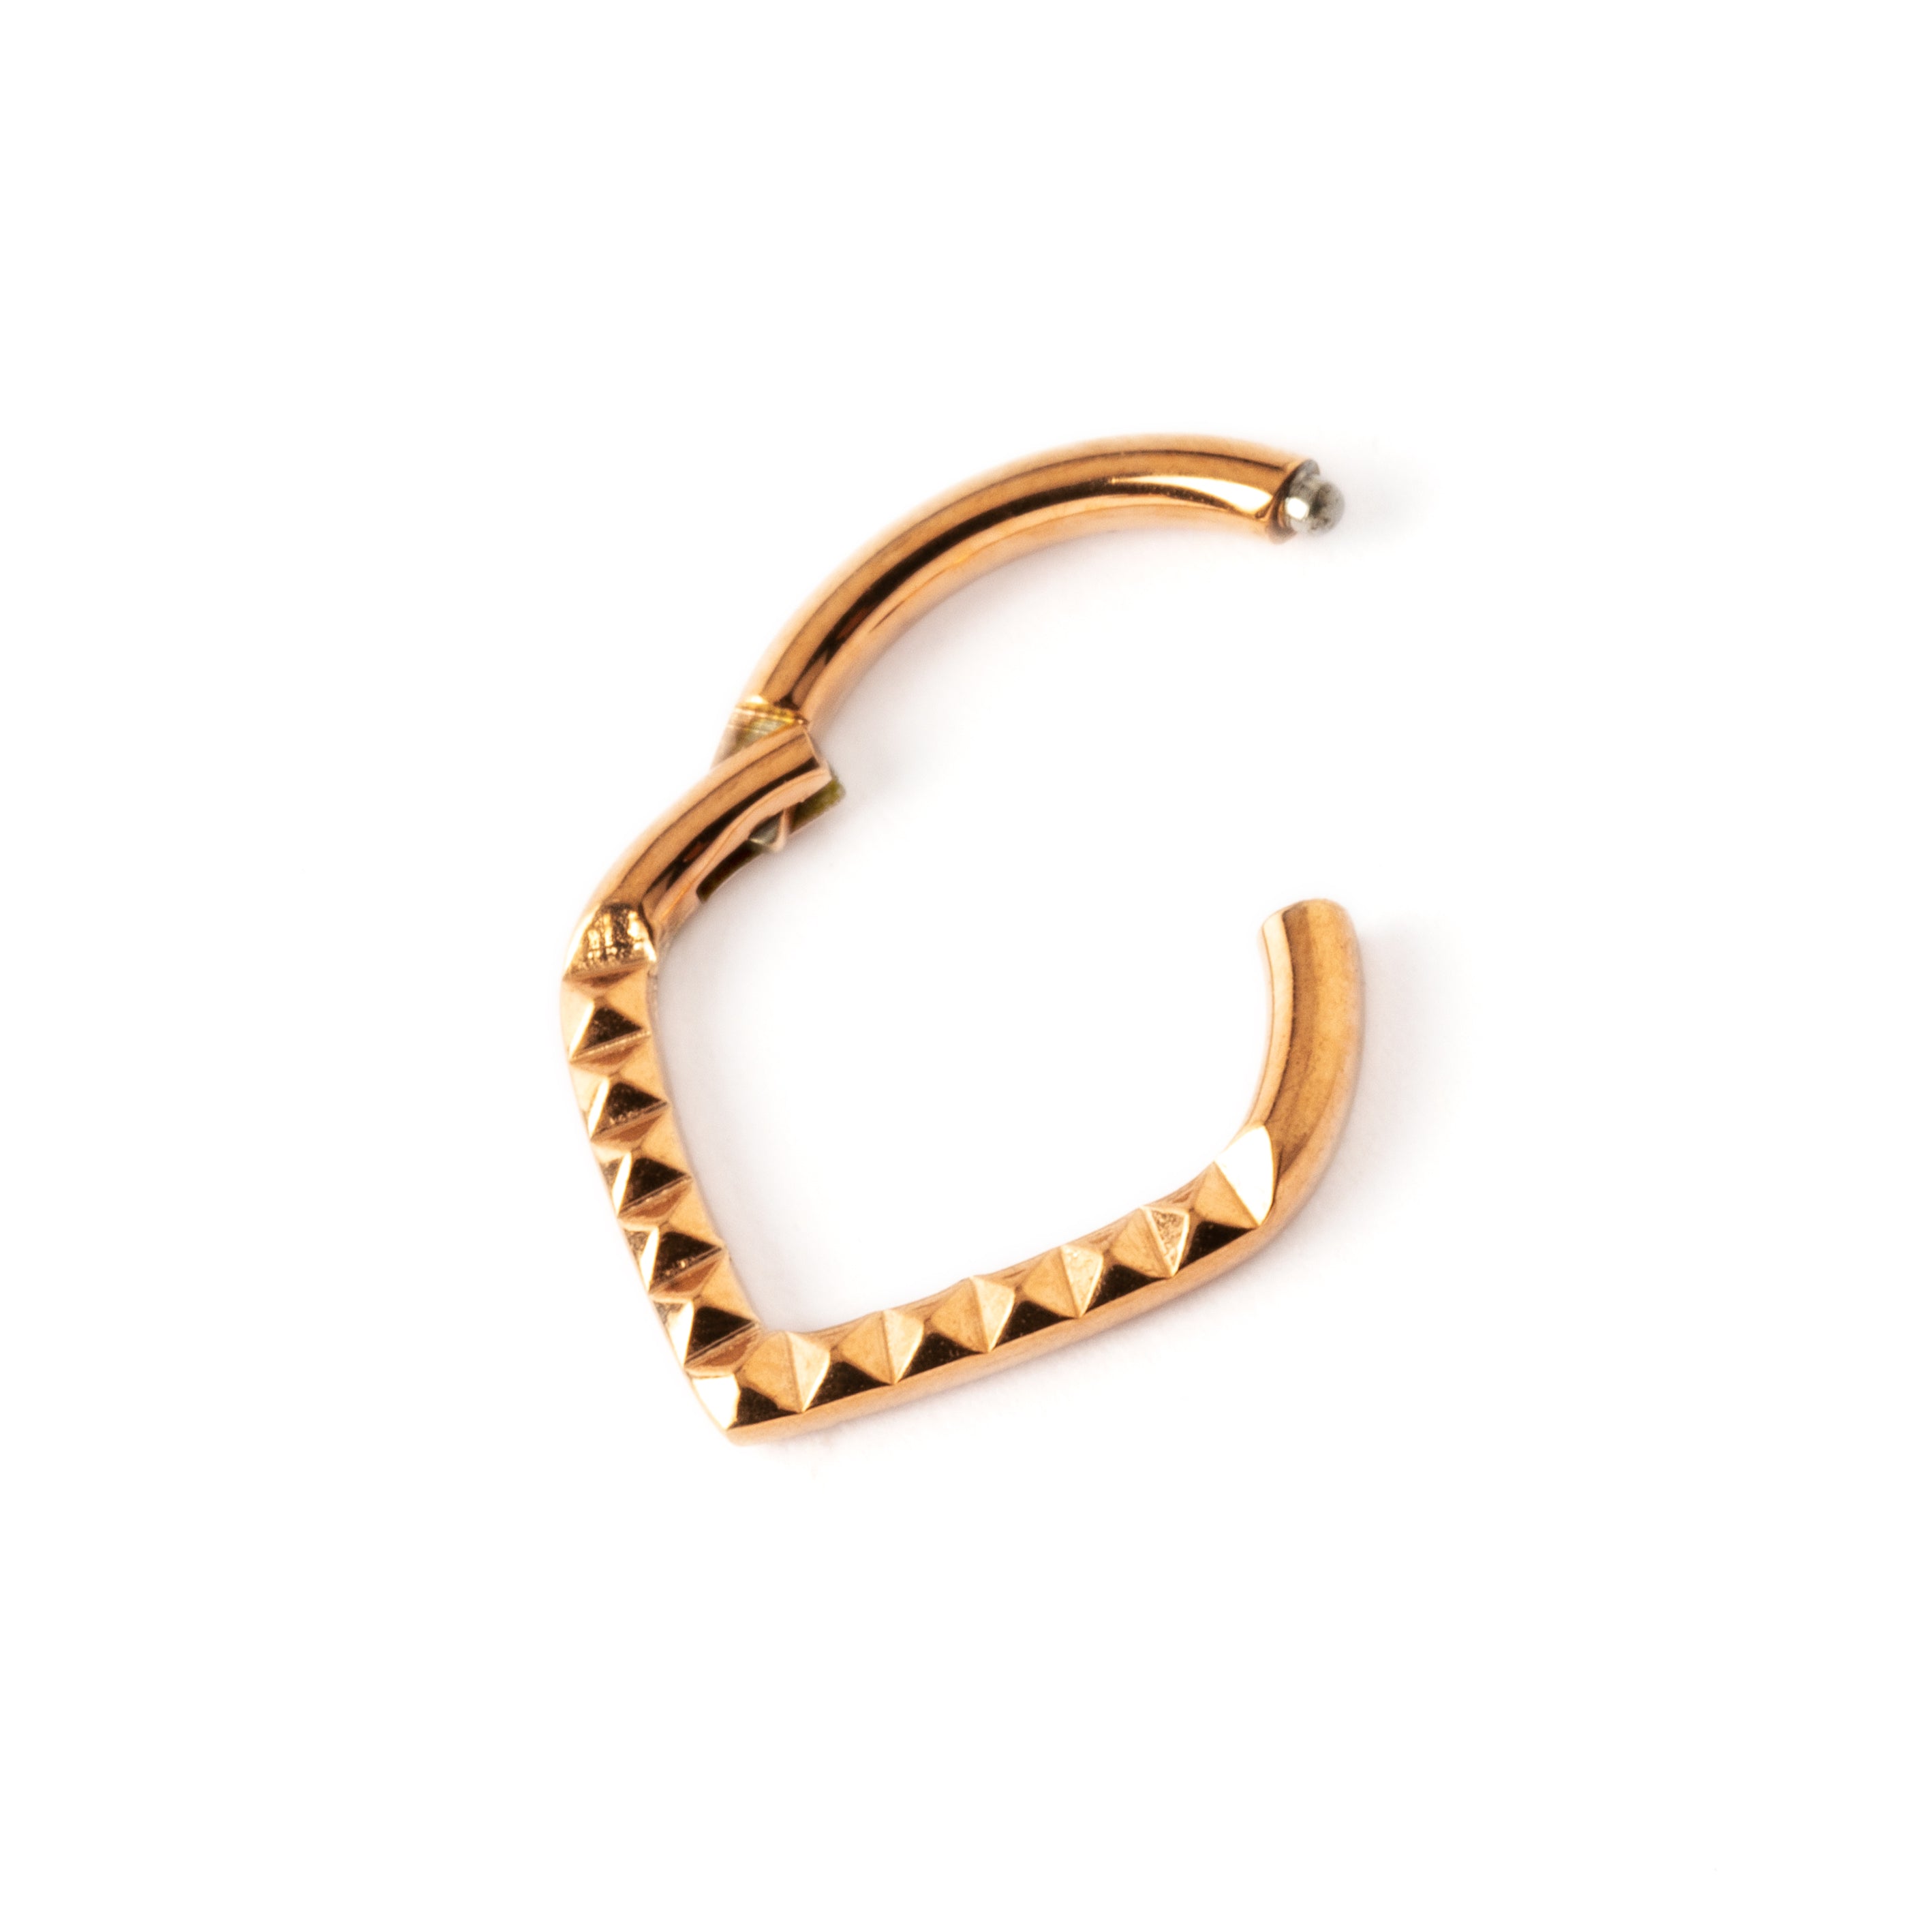 Giza rose gold surgical steel teardrop shaped septum clicker closure view